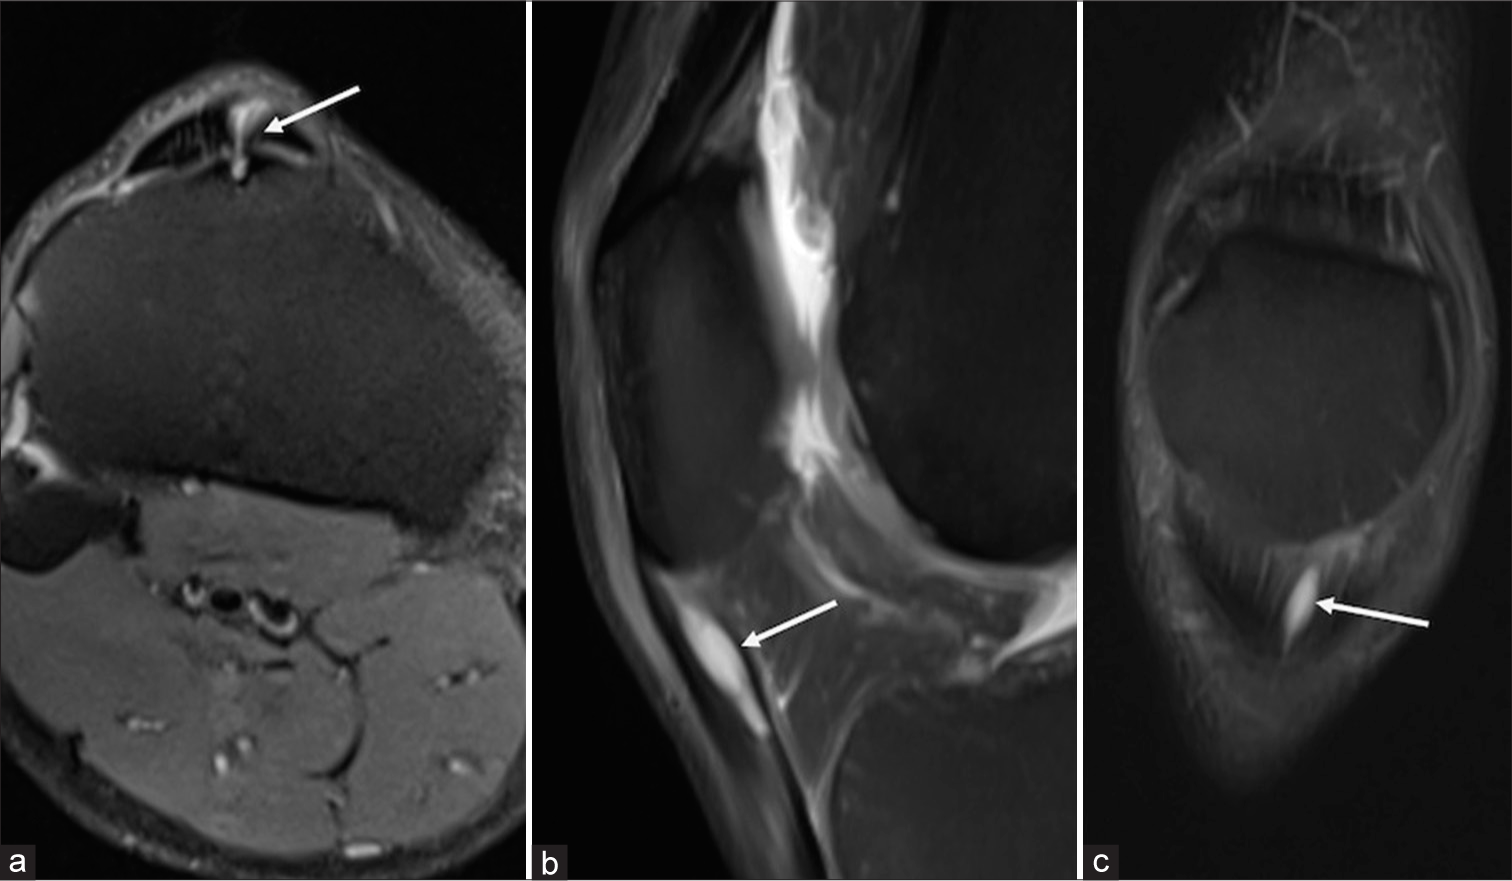 (a) Axial, (b) sagittal, and (c) coronal proton-density fat-saturated (PDFS) images of magnetic resonance imaging knee at the level of cyst show a well-defined PDFS fluid intensity oval-shaped lesion noted just distal to the inferior pole of the patella in the patellar tendon (White arrow). The cyst has caused mild local expansion of the patellar tendon, resulting in a focal fusiform enlargement. Note the partial tear of a few fibers of the patellar tendon (White arrow).